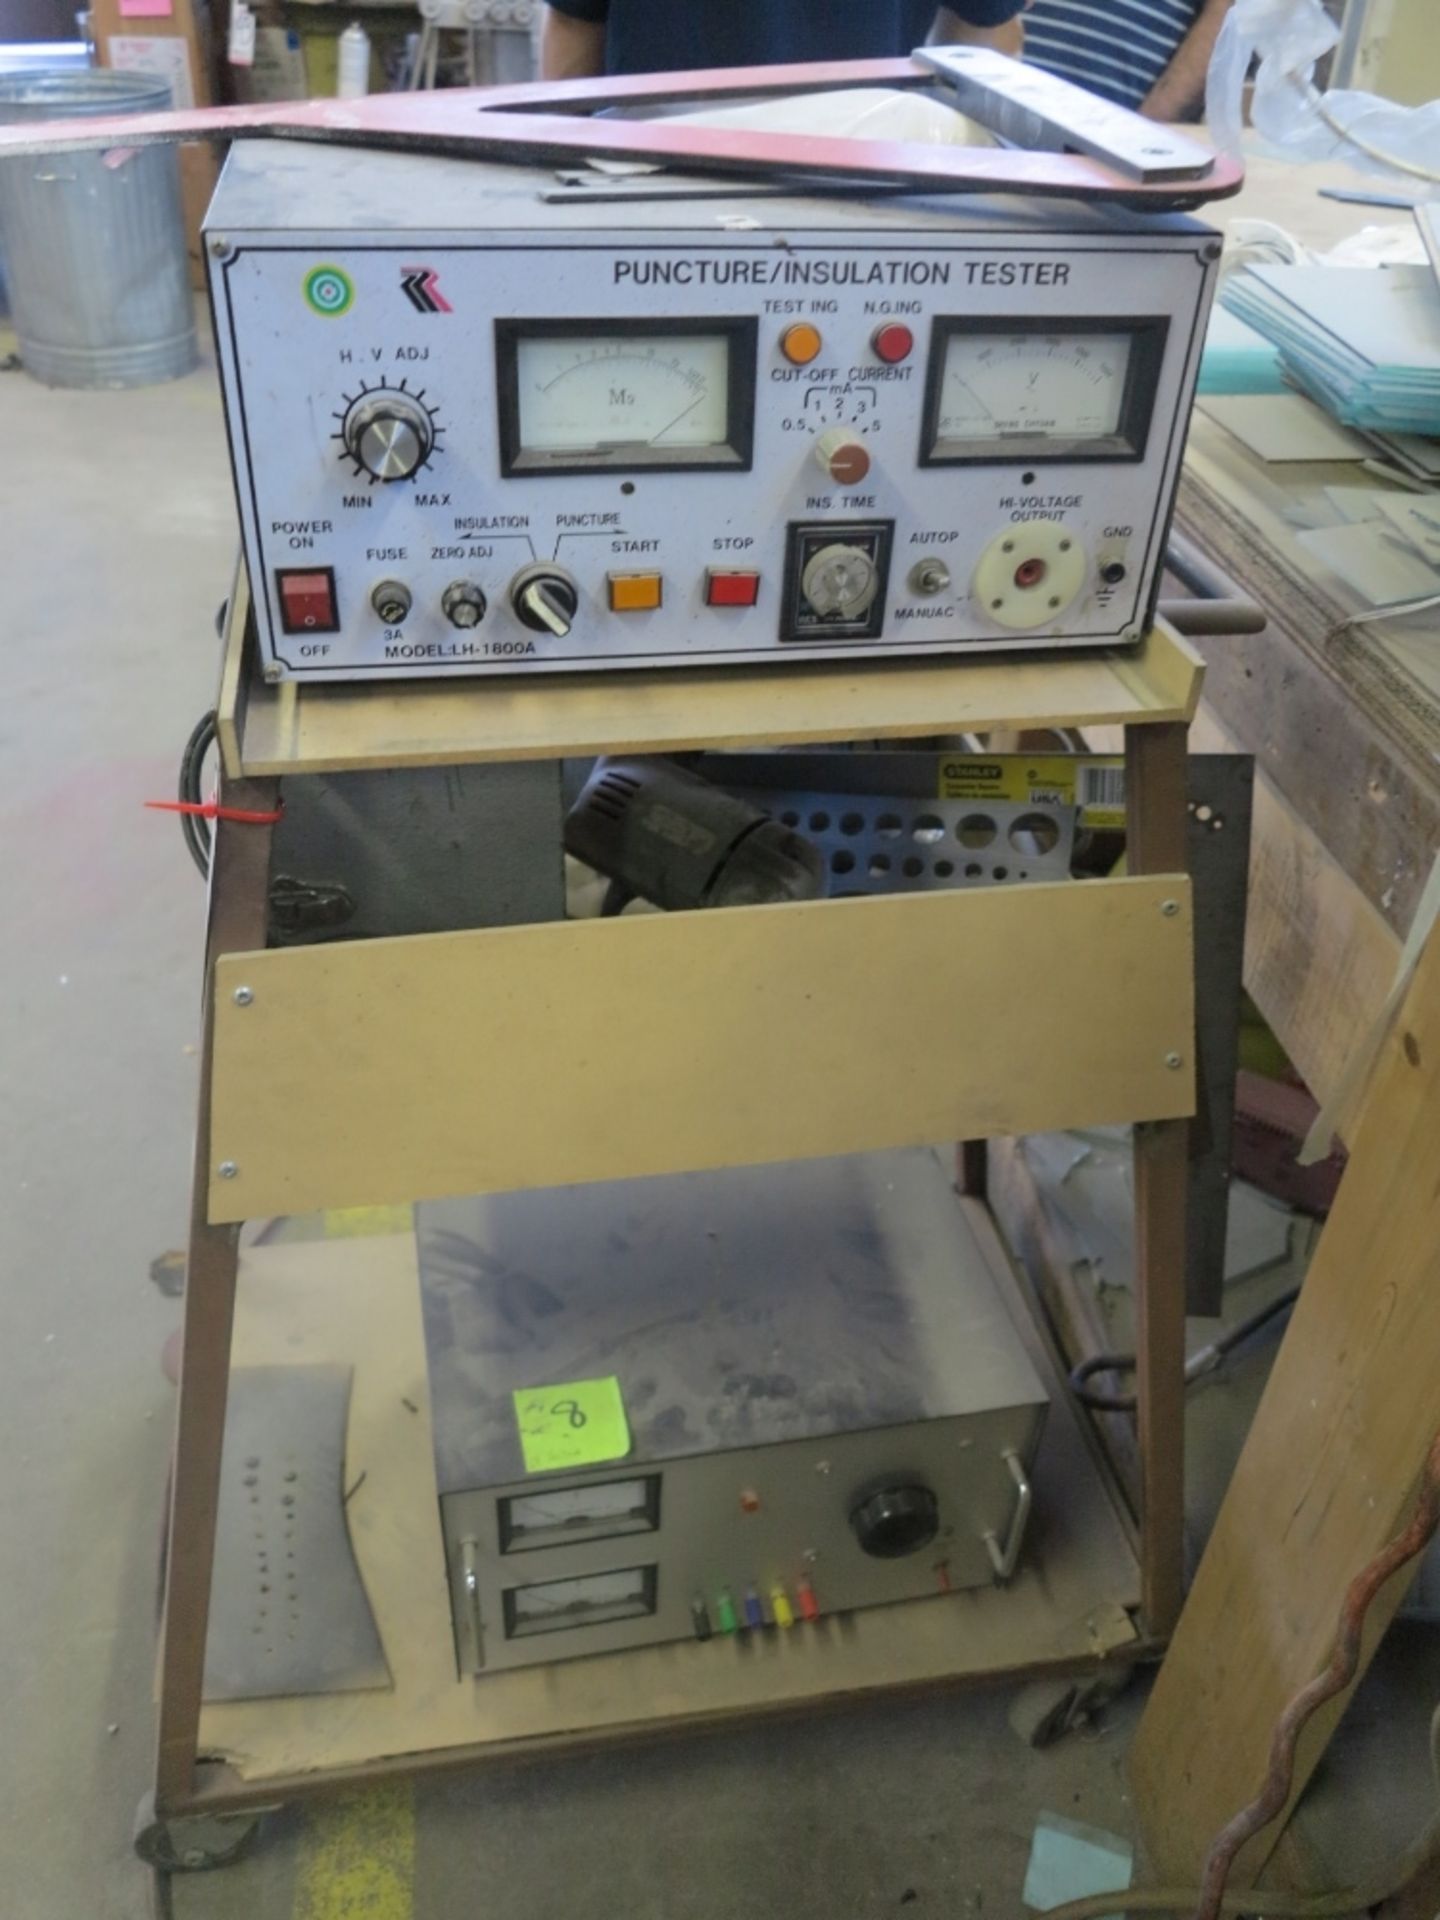 LOT - TEST EQUIPMENT TO INCLUDE: (1) HIGHPOT TESTER, (1) RESISTANCE TESTER, (1) INSULATION TESTER - Image 2 of 2